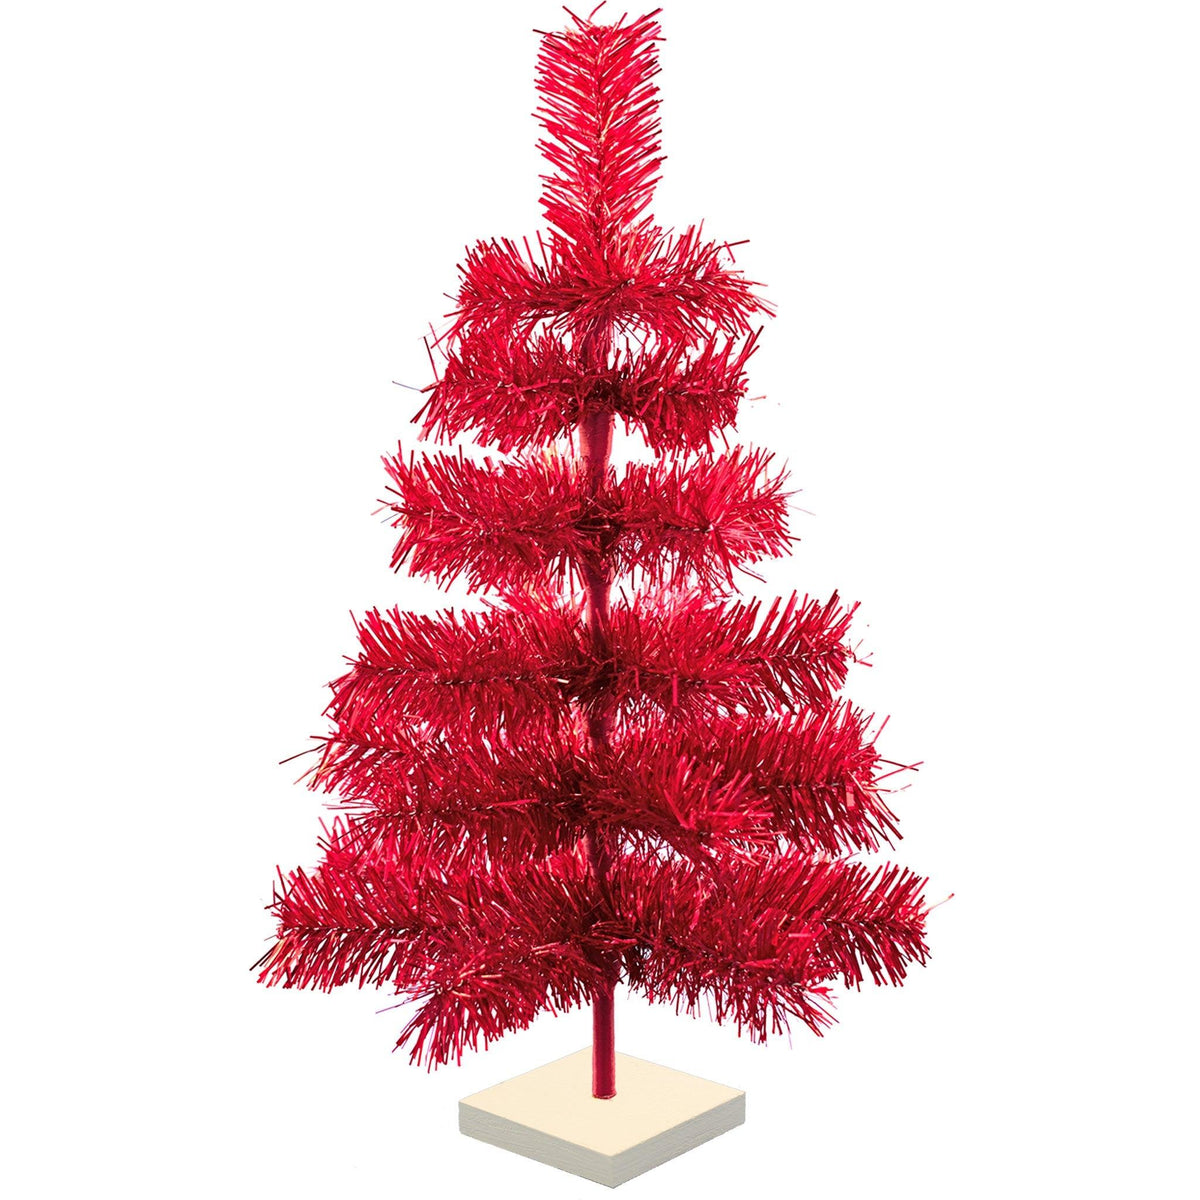 The 24in Tall Red Tinsel Christmas Tree from Lee Display.  On sale now at leedisplay.com